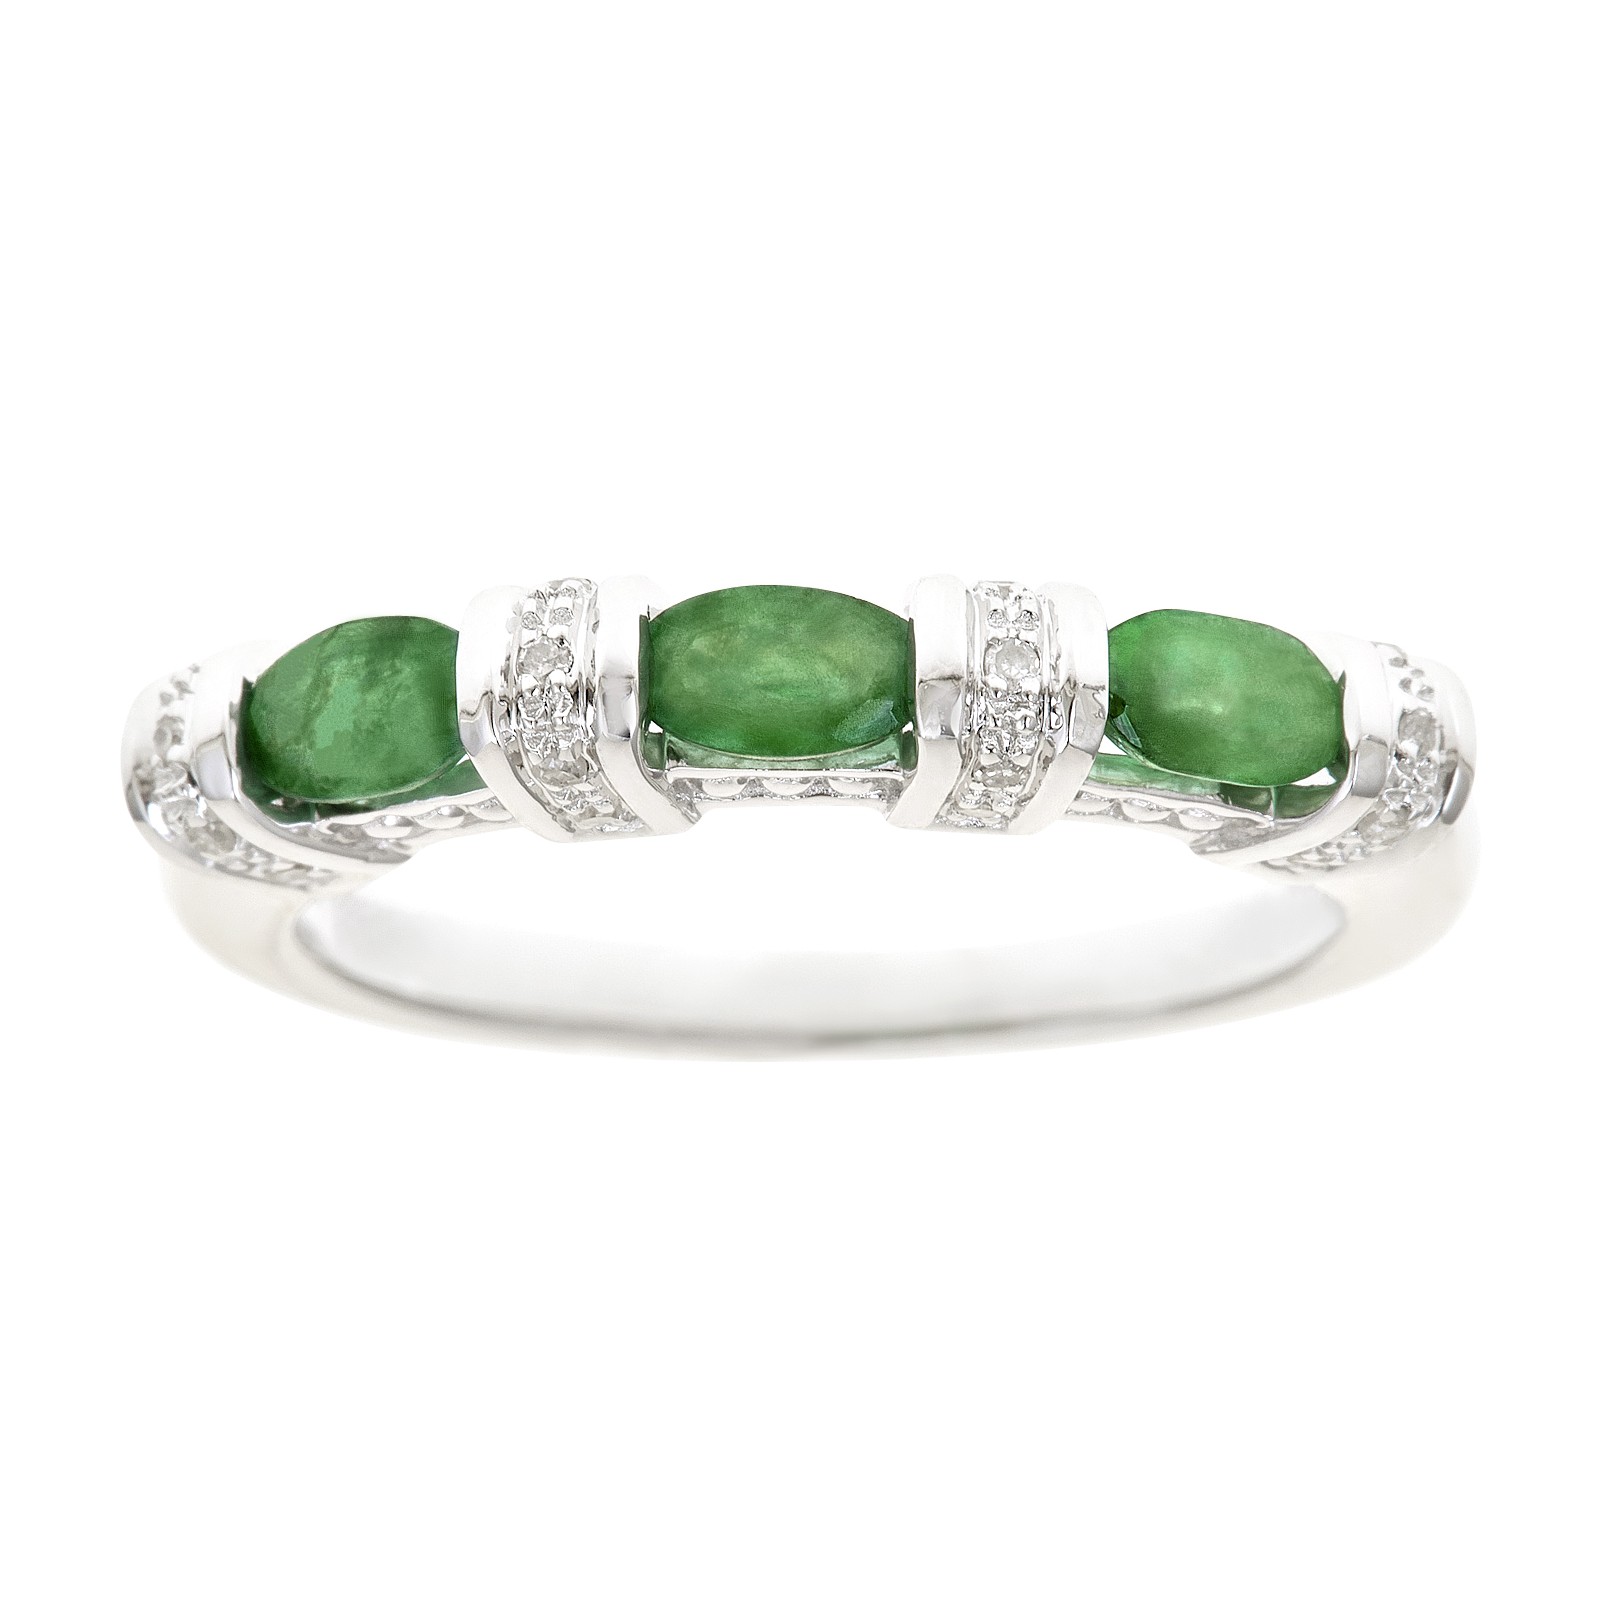 Ladies Sterling Silver 3 Stone Genuine Emerald and Diamond Accent Ring